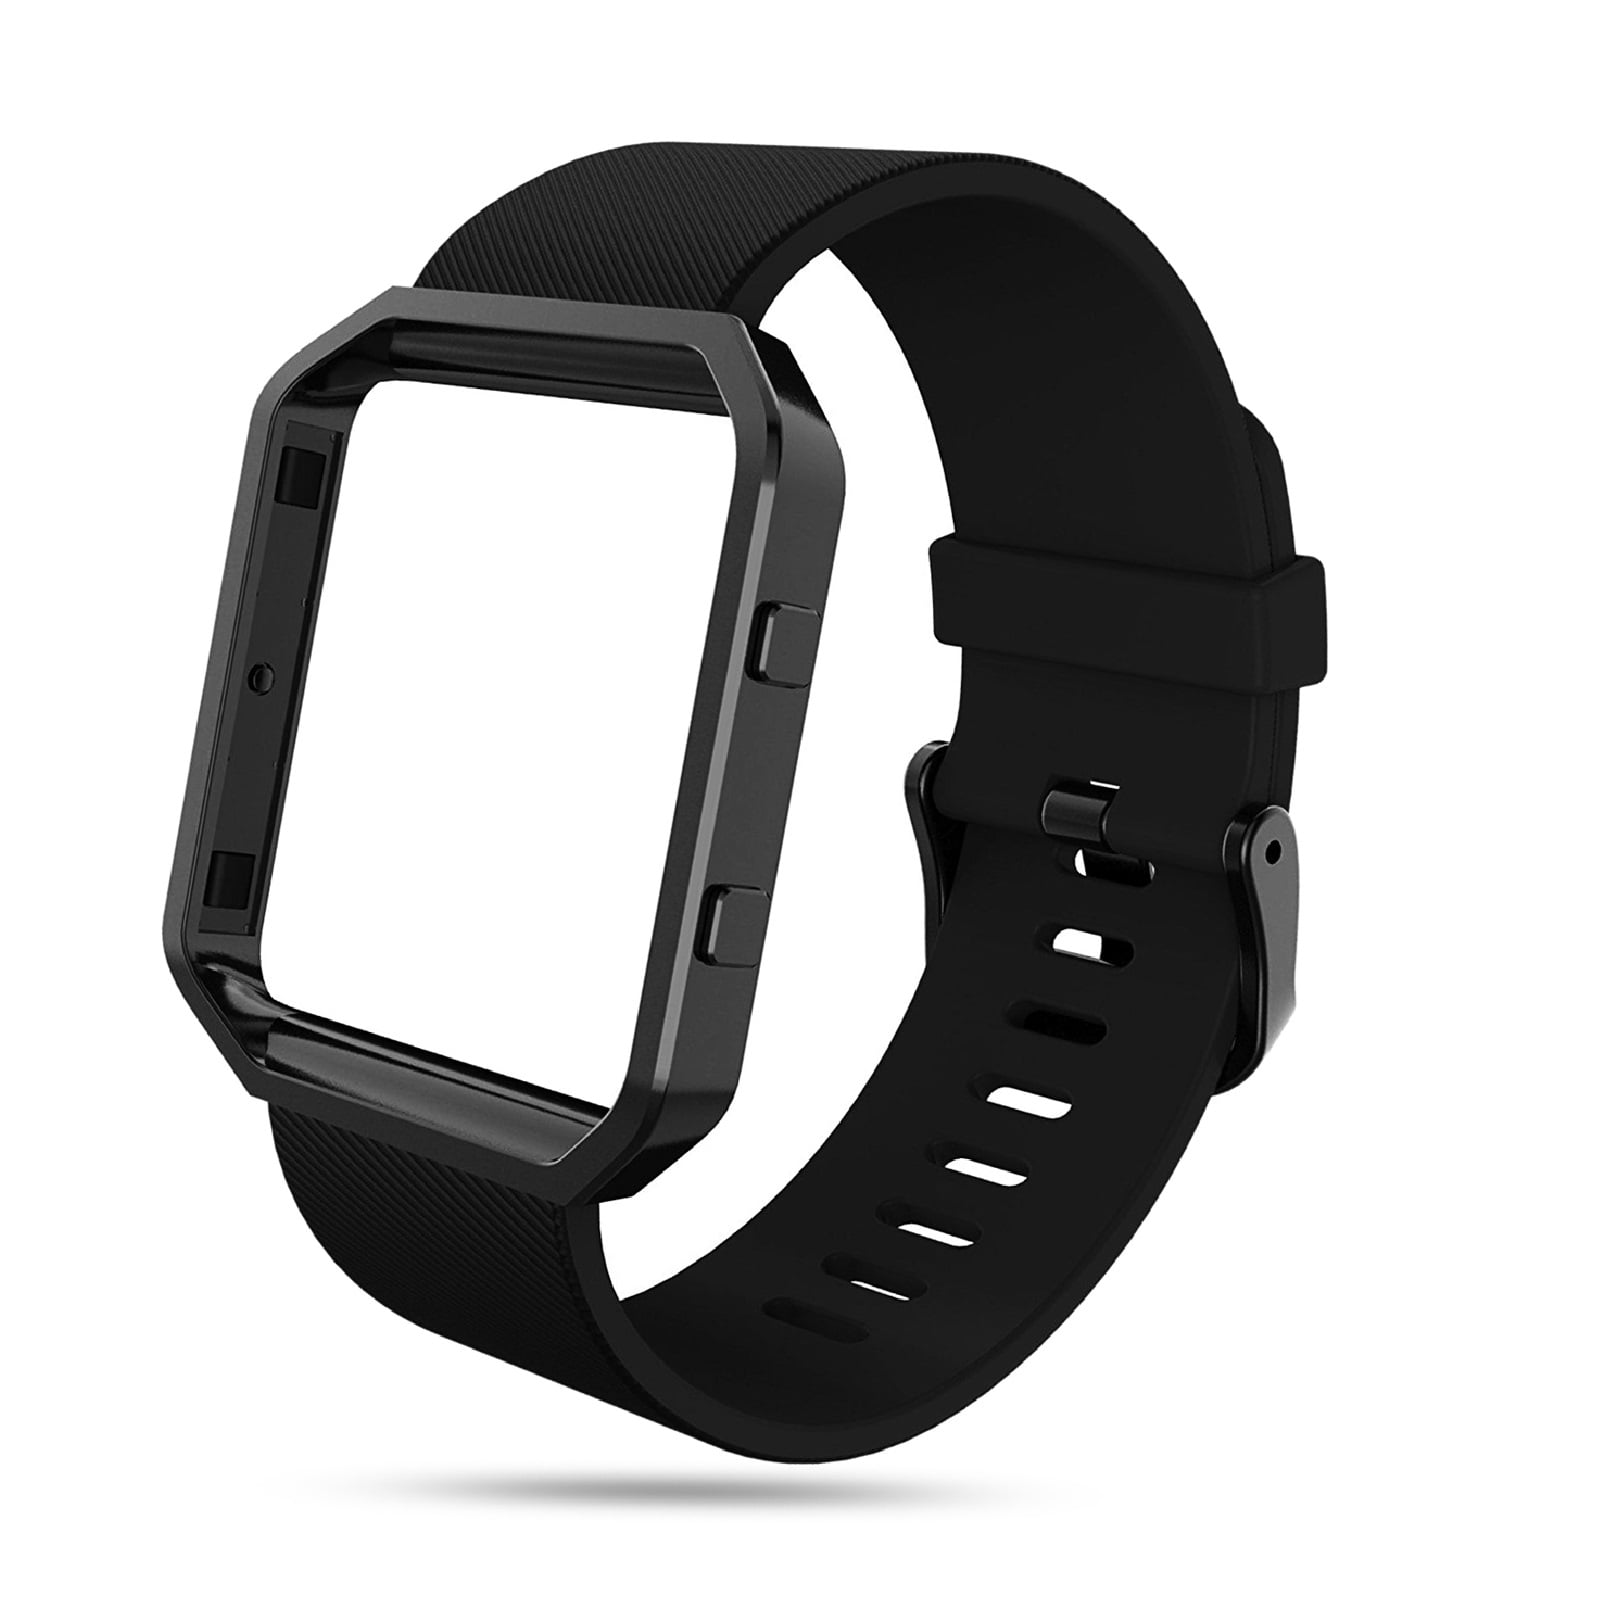 NEW Fitbit Blaze Accessory replacement Black Leather Wrist Band & Frame S/L 